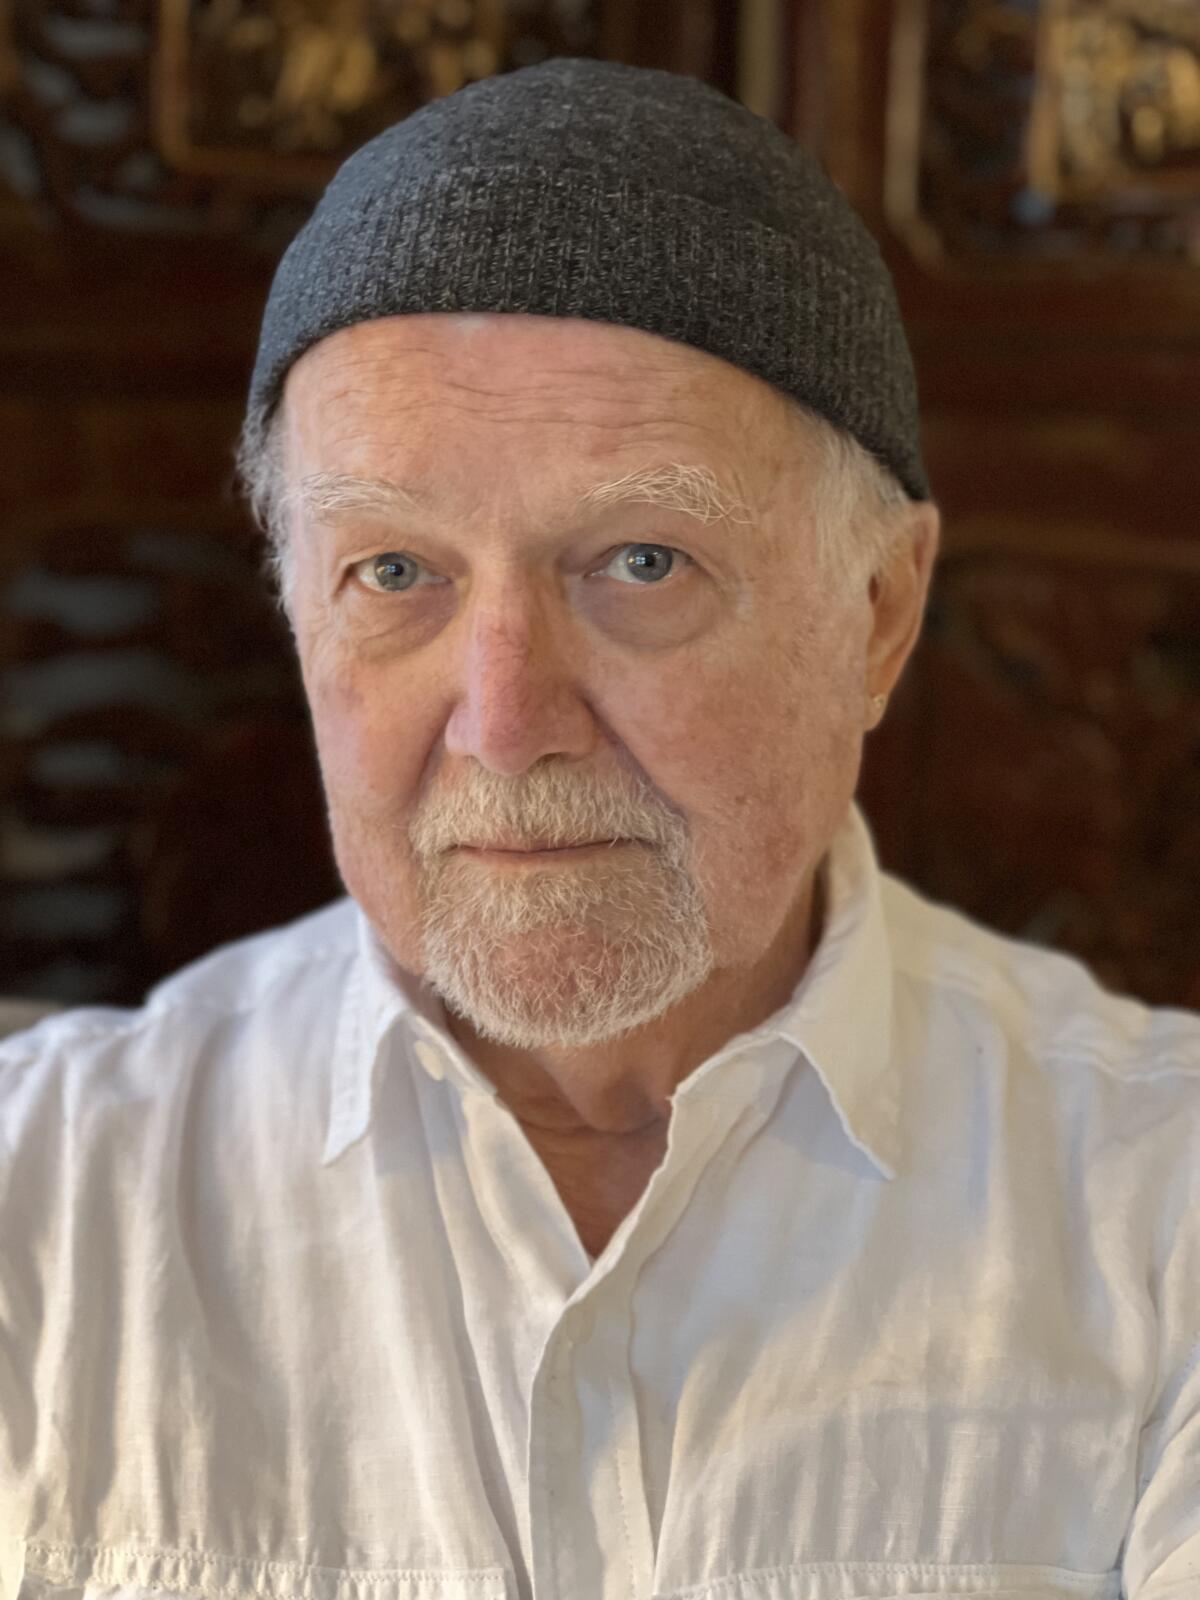 Russell Banks, who died Sunday at 82, wrote many novels exploring father-son conflict and American sins.